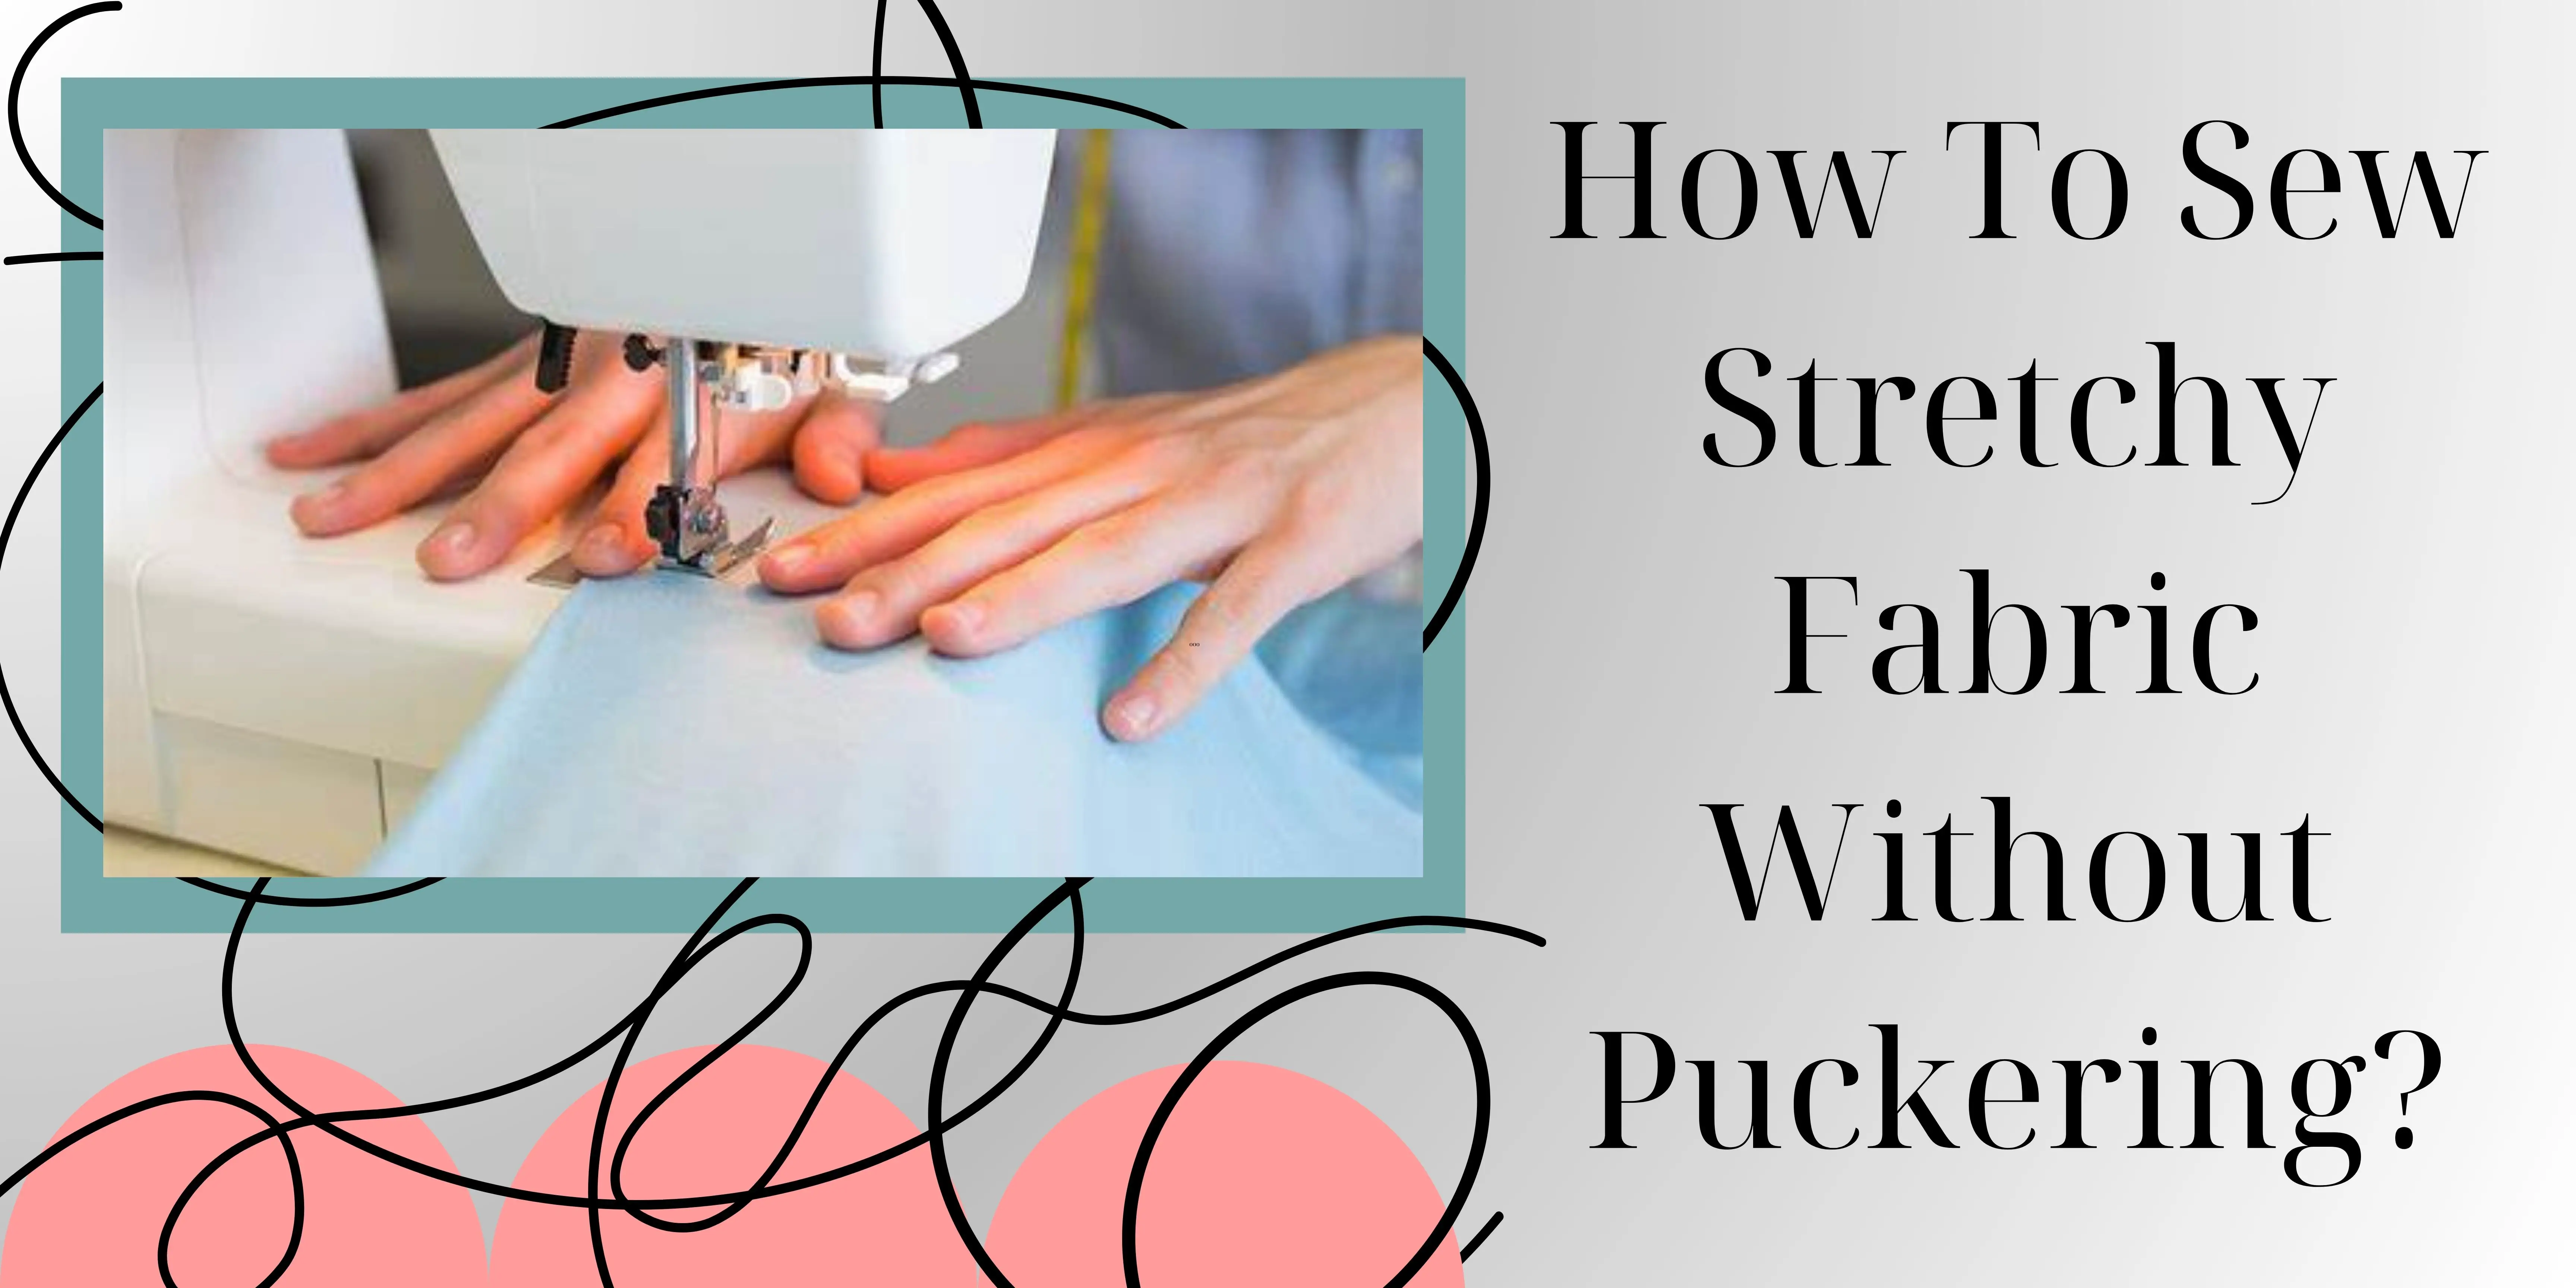 How To Sew Stretchy Fabric Without Puckering?